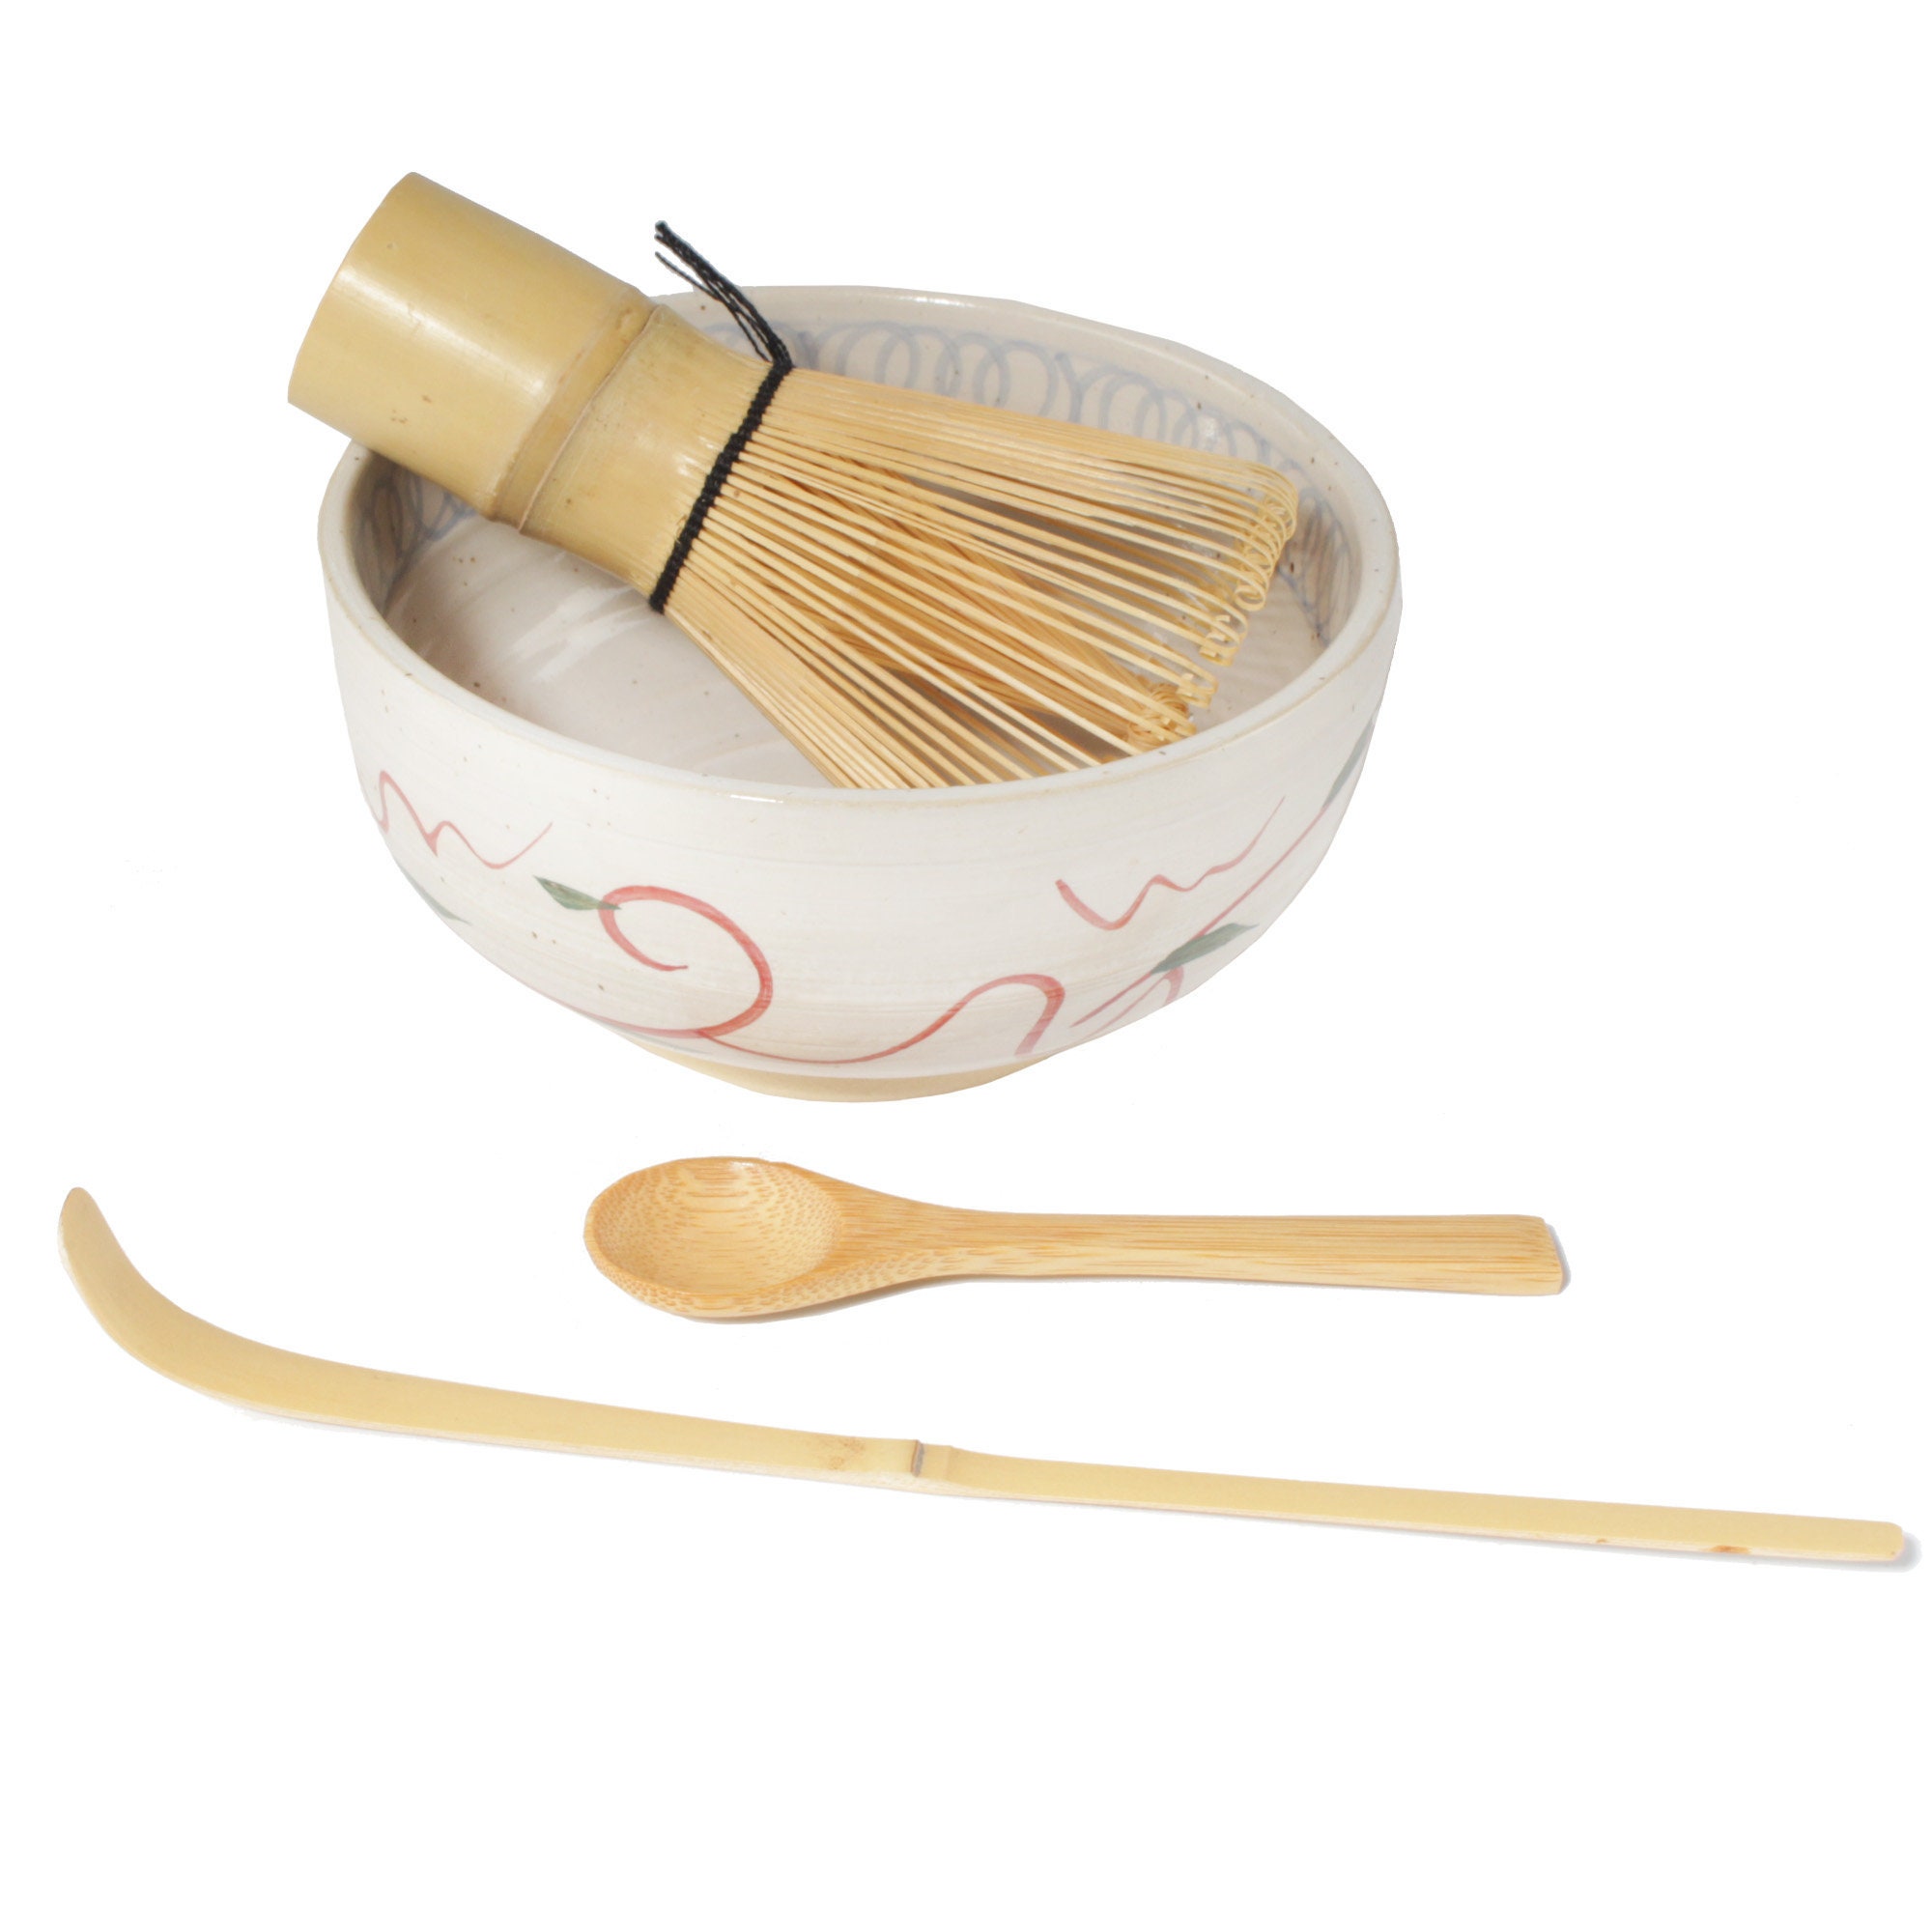  Matcha Whisk Set - Chasen (Green Tea Whisk), Small Scoop,Tea  Spoon by BambooMN : Home & Kitchen